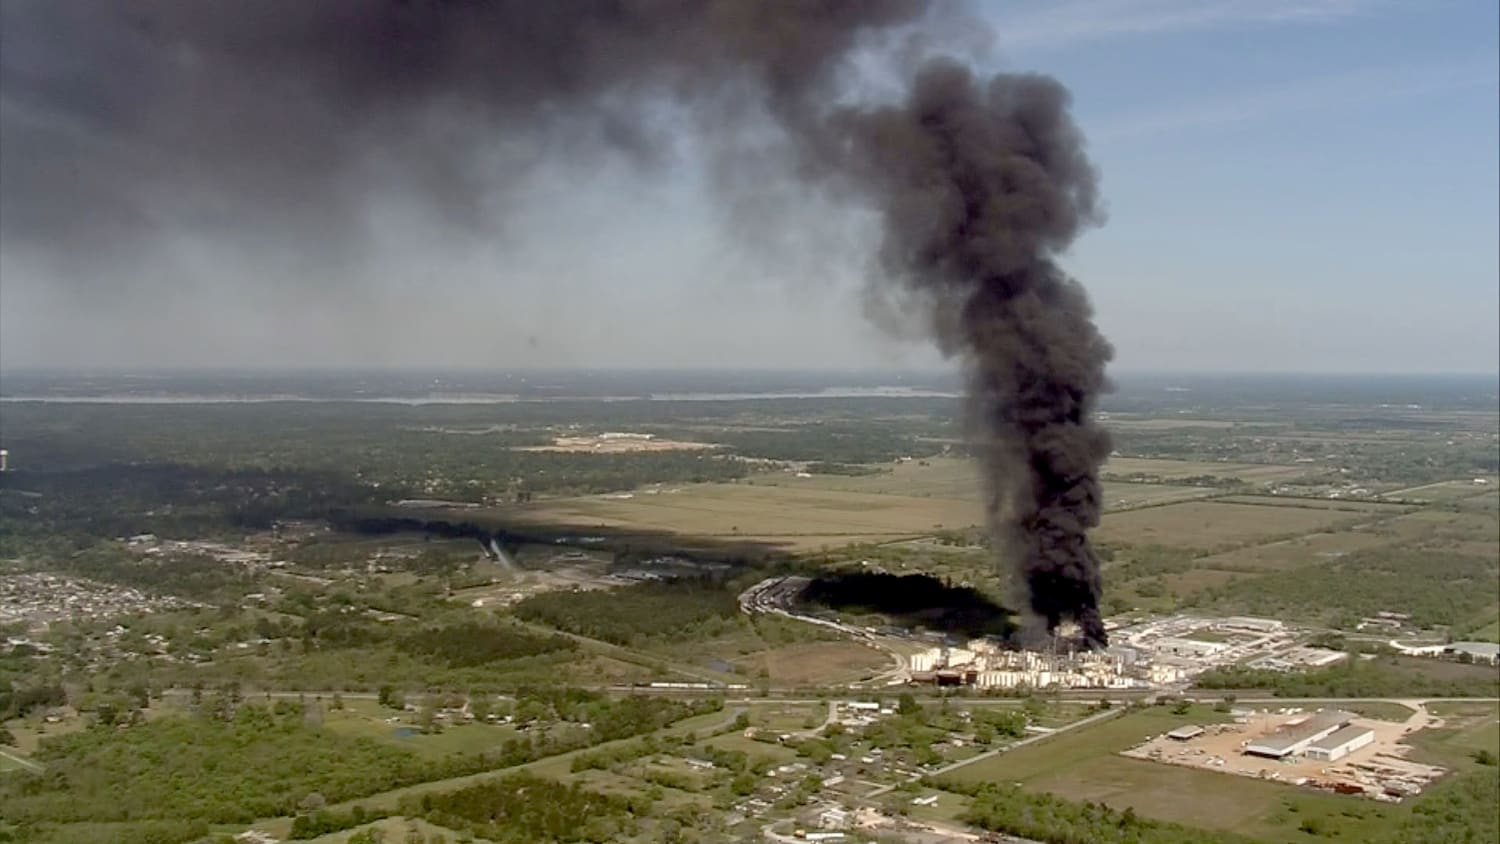 At least 1 dead, 2 critically injured in Houston area chemical plant fire